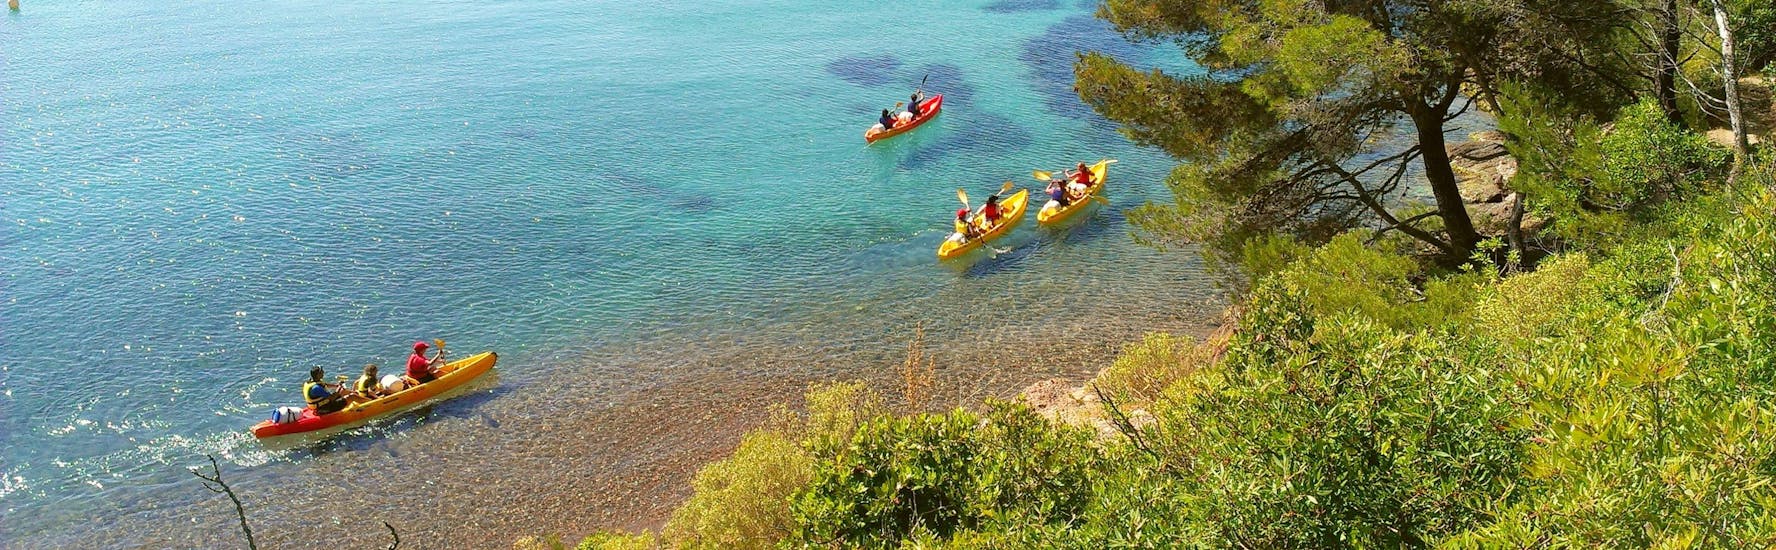 Sea Kayak Hire in Cannes or Saint-Raphaël with Sea First.